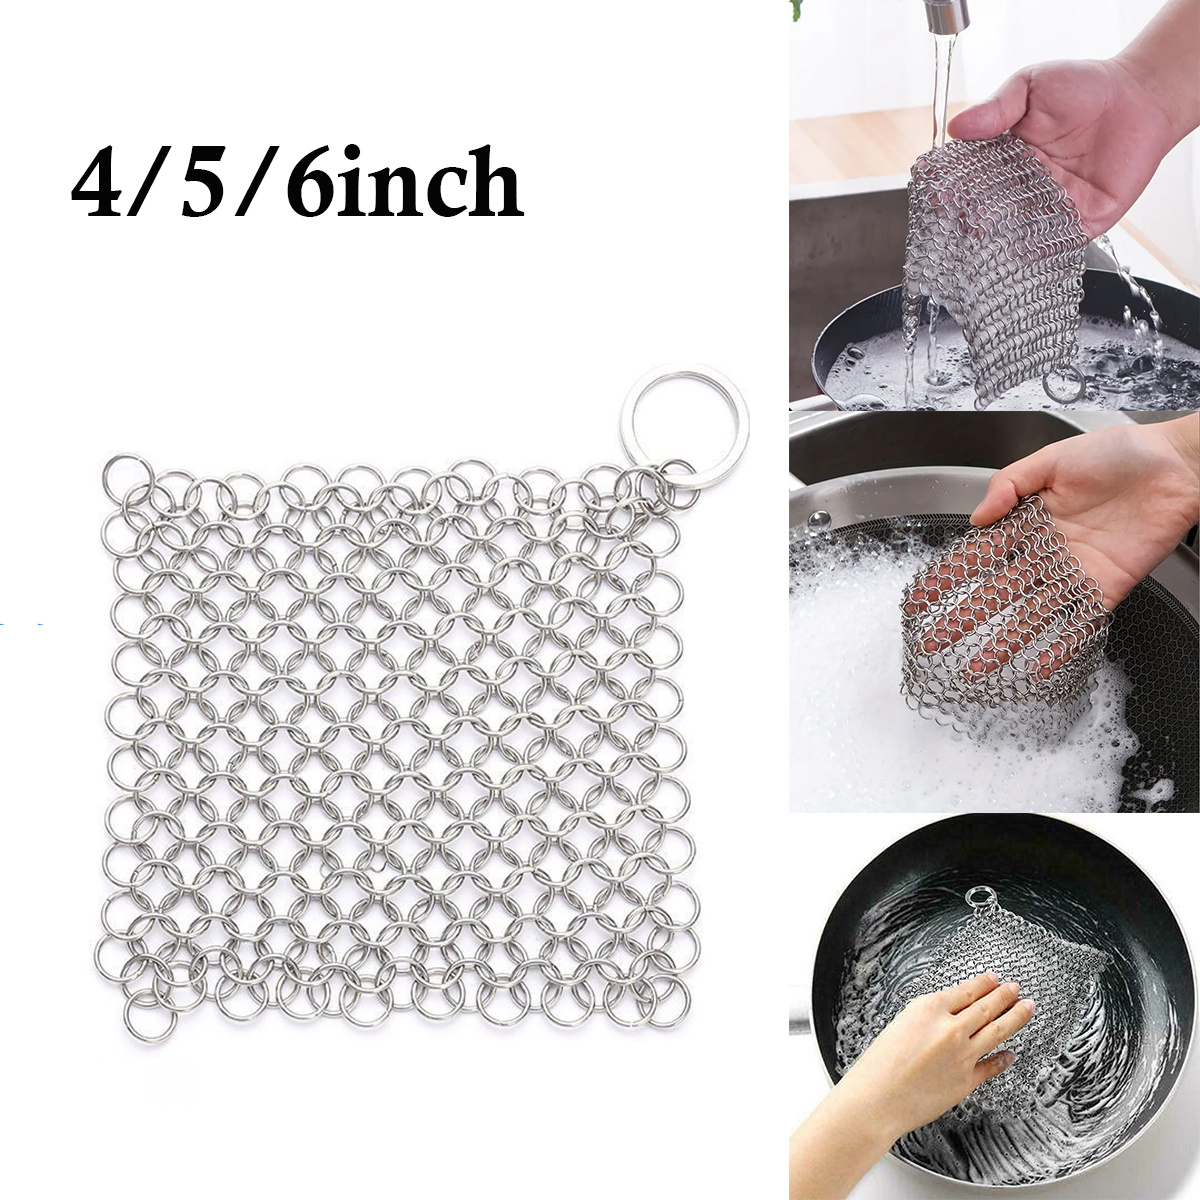 Cast Iron Scrubber Chainmail Cleaner for Cast Iron Pans, Stainless Steel Chain  Mail to Clean Cast